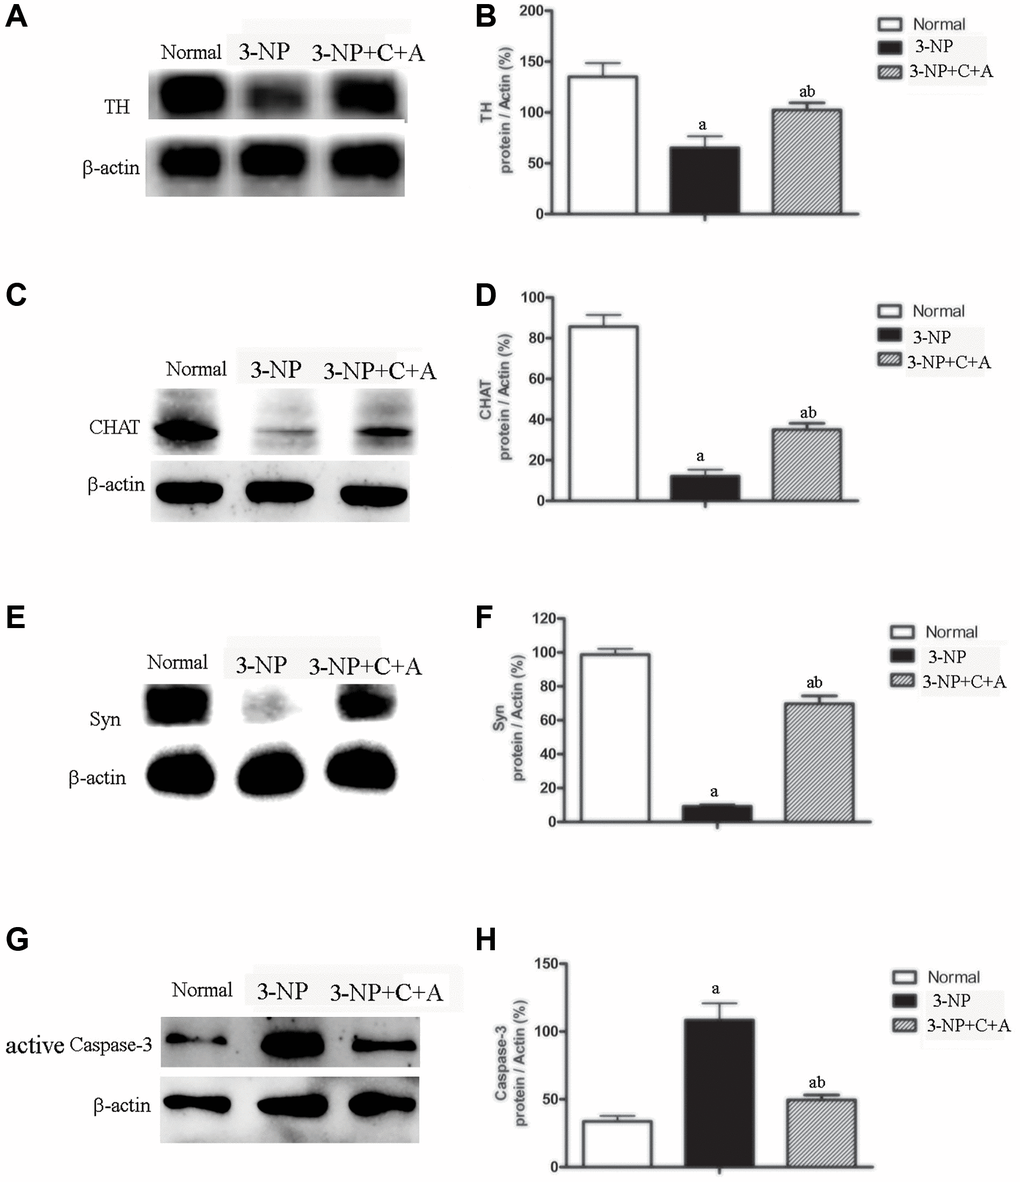 Treatment with C16+Ang-l can alleviate 3-NP-induced TH and CHAT expression decline, neuronal death, and synaptophysin loss. Western blot semi-quantitative analyses of (A–B) TH (for dopamine neurons), (C–D) CHAT (for cholinergic neurons), (E–F) Syn (synapse-associated proteins that showed synaptic plasticity and correlate with cognitive decline), and (G–H) active caspase-3 (an enzyme involved in mammalian apoptotic cell death) in the control, 3-NP, and 3-NP+C16+Ang-1 groups. aP bP 